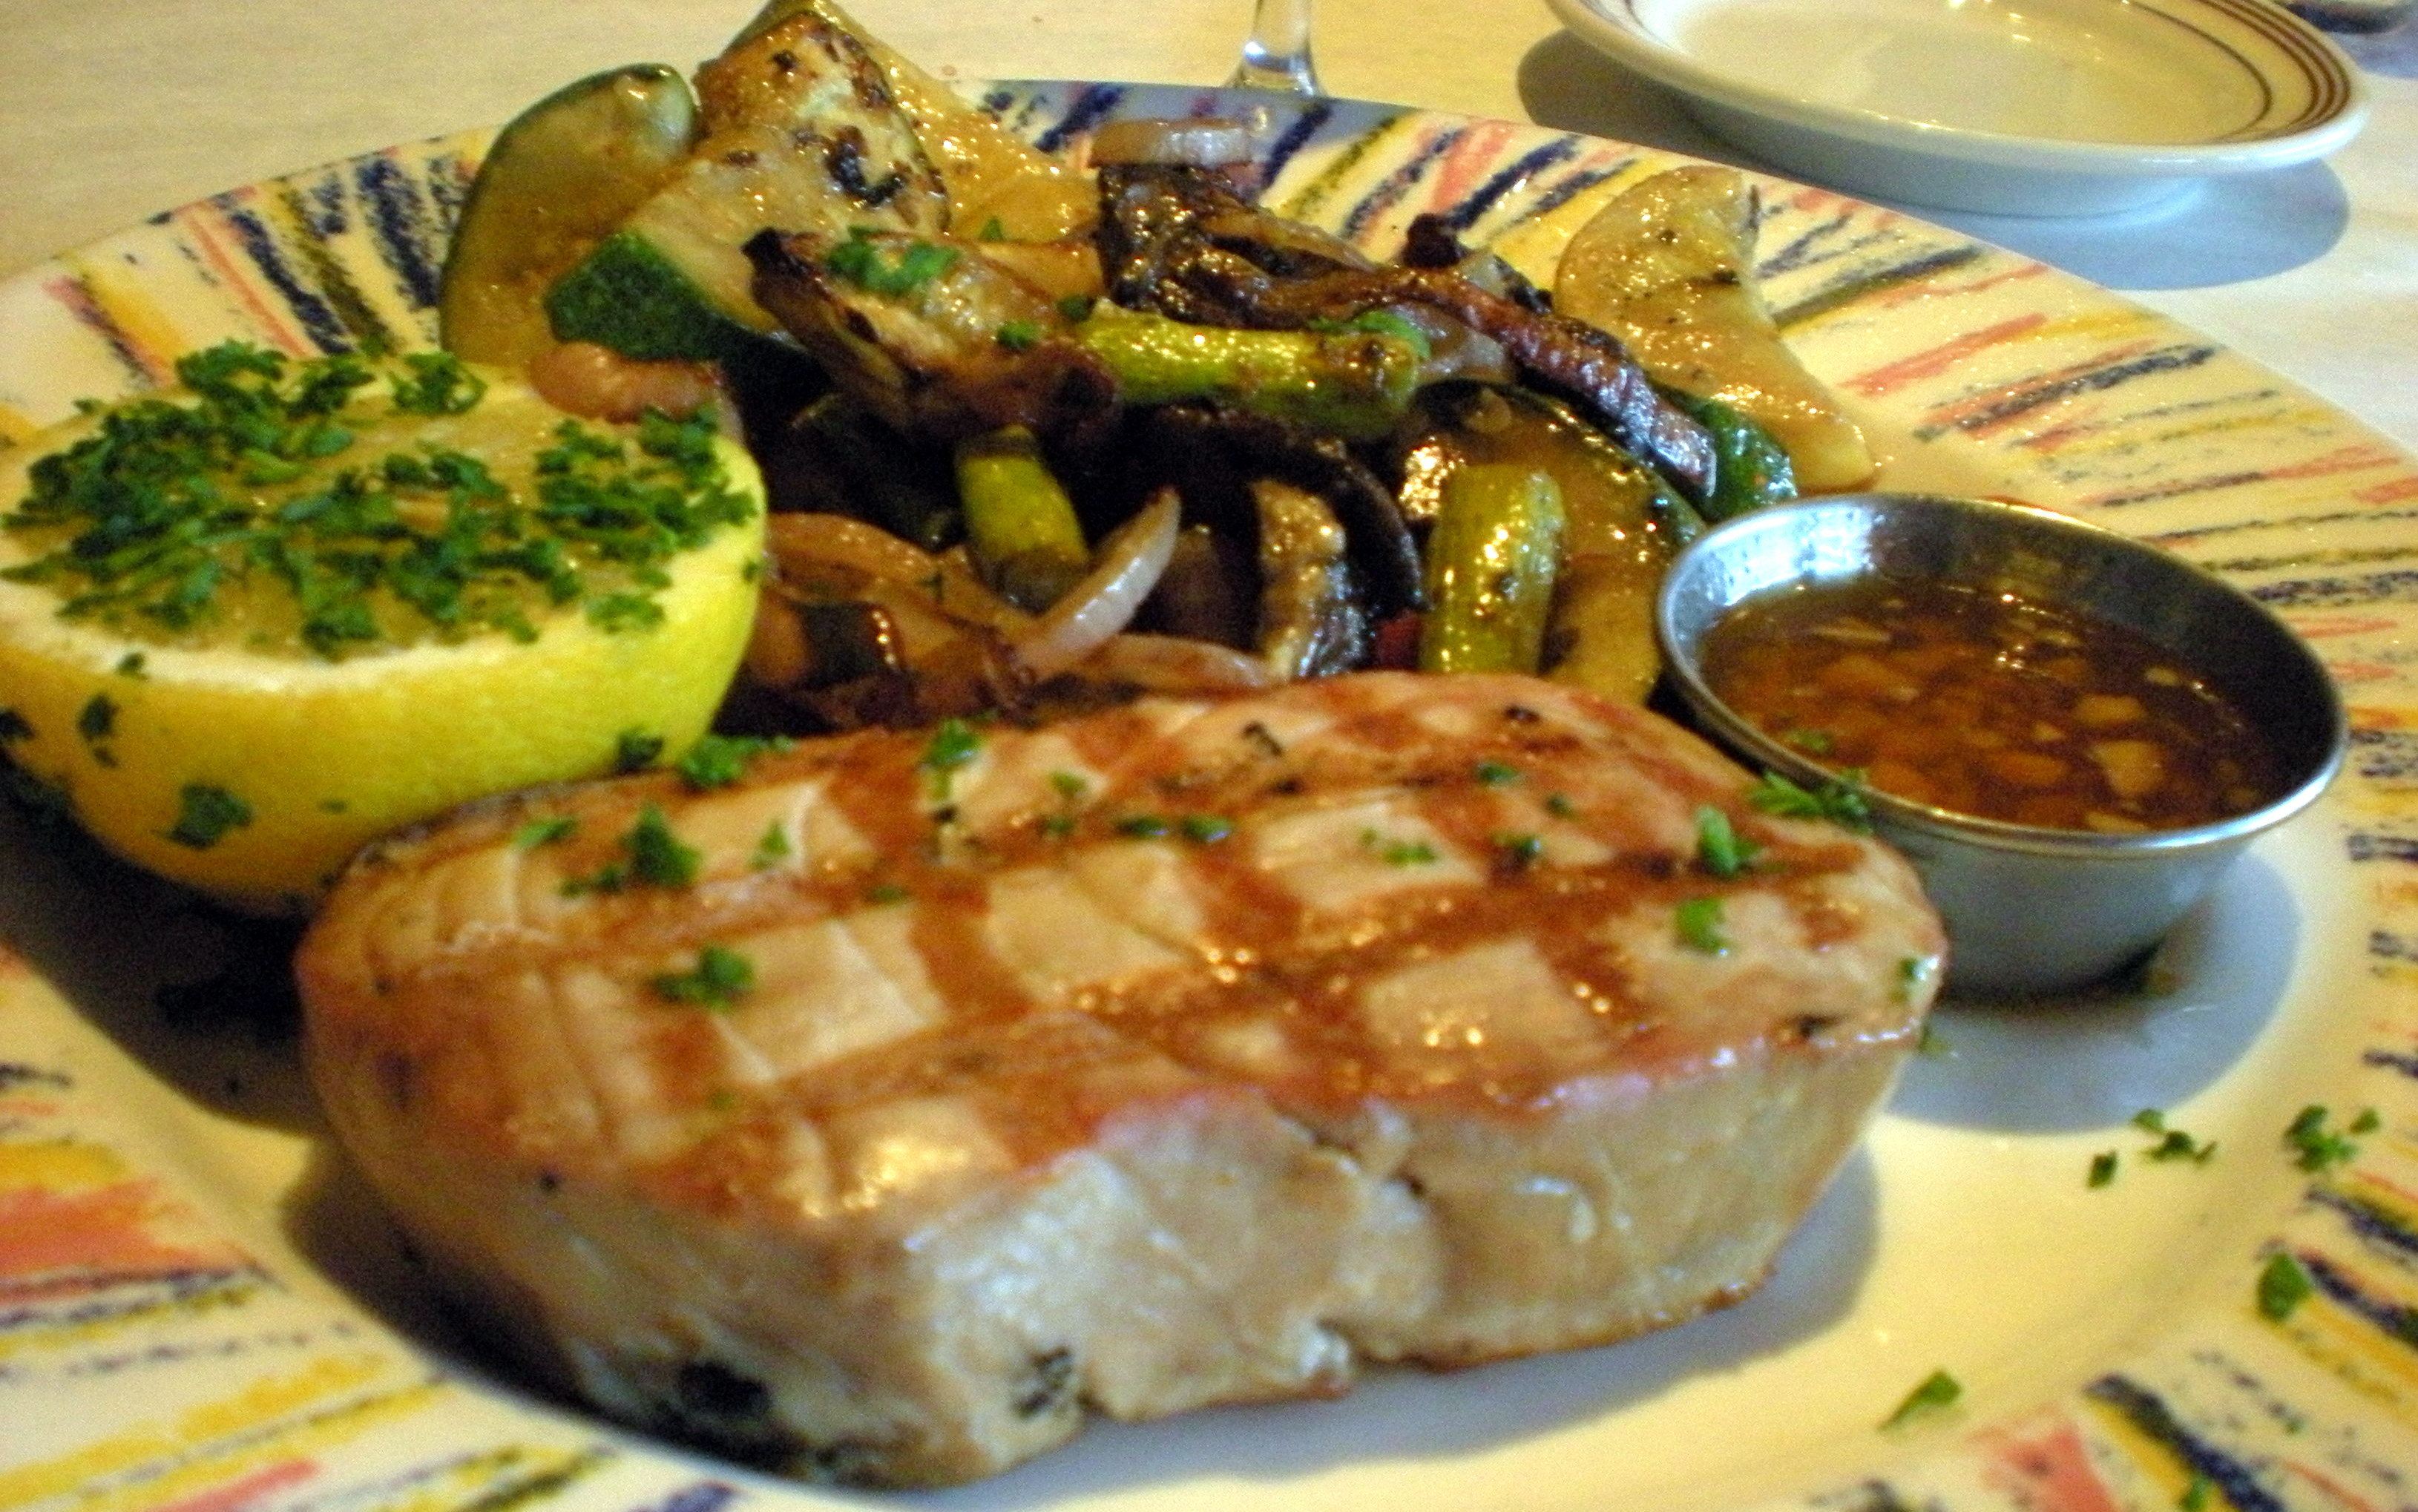 Grilled Tuna with Sweet Chile Sauce served with Grilled Veg.